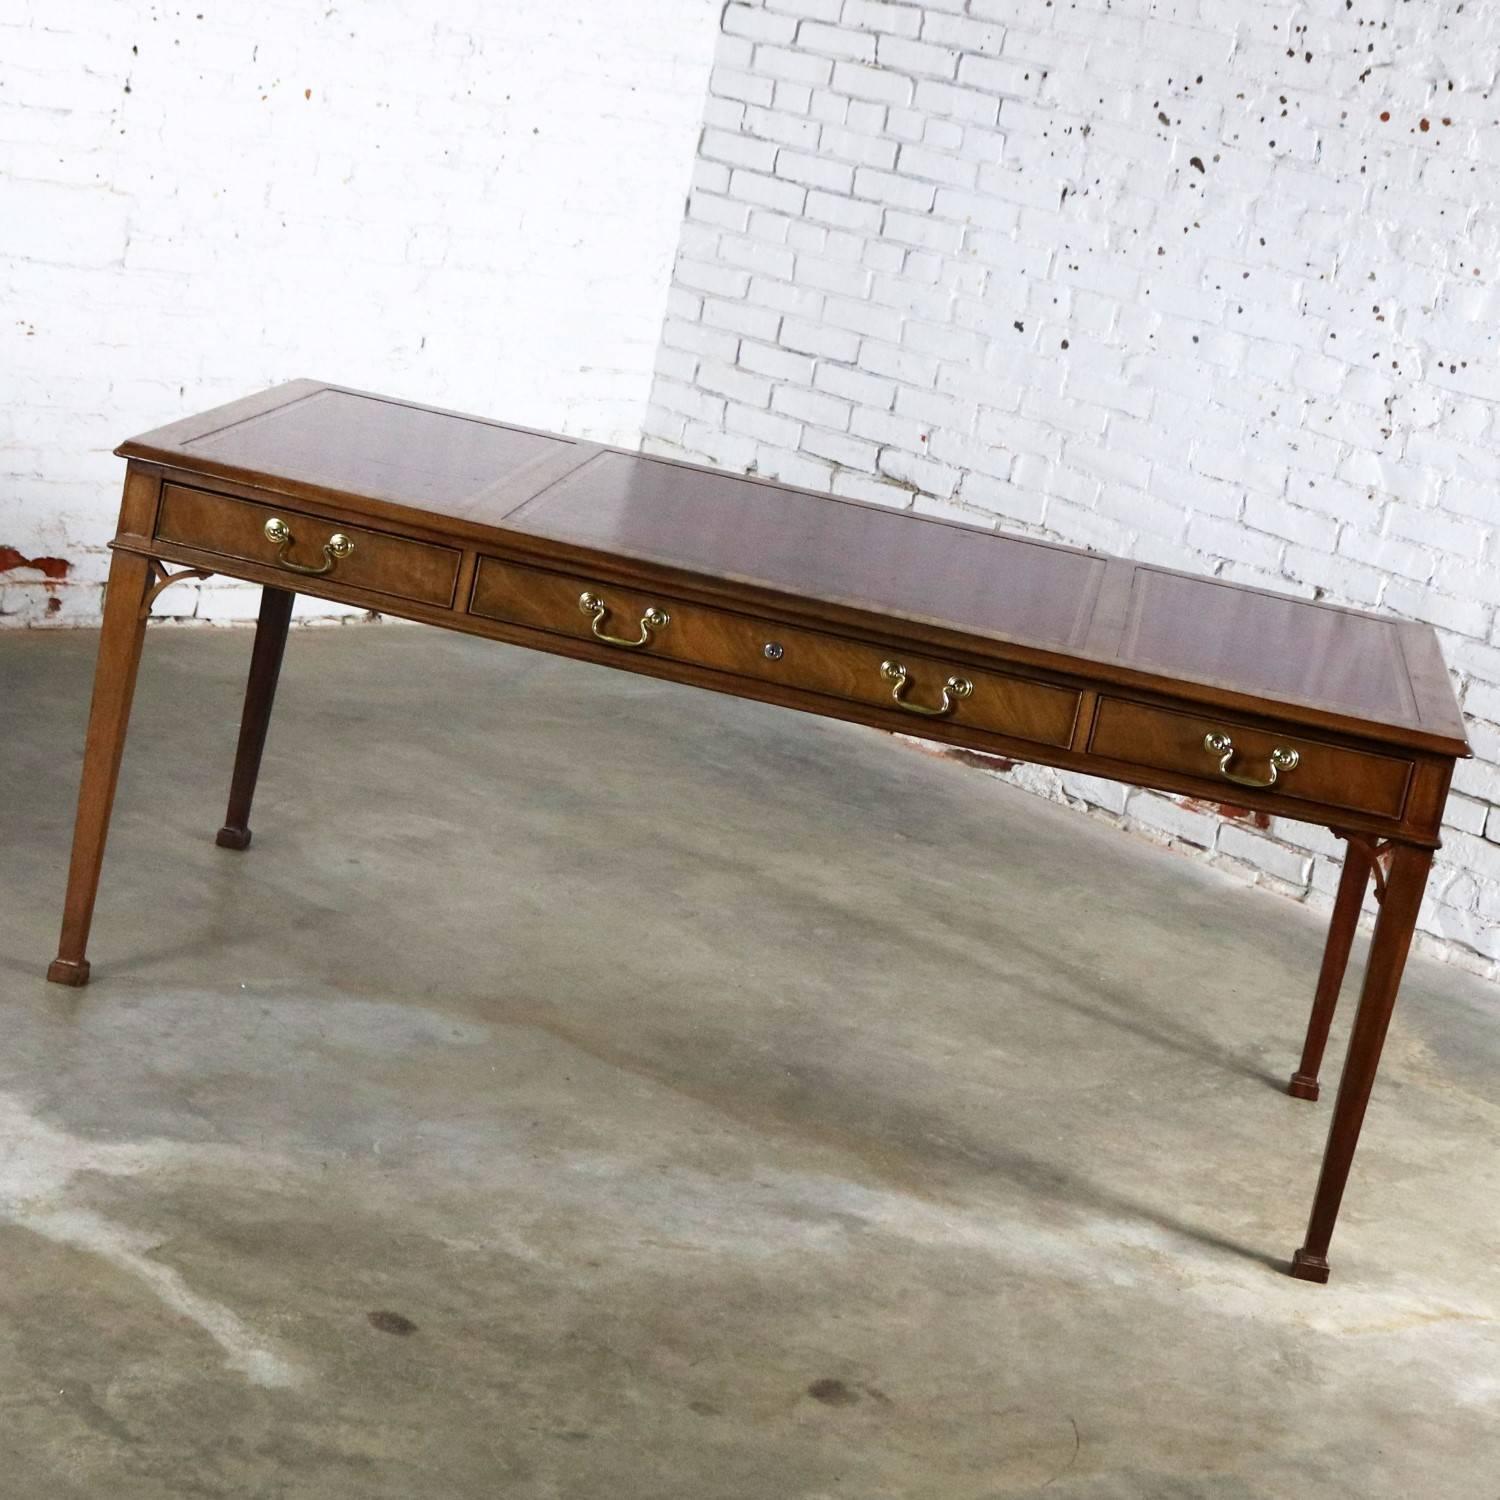 Very handsome vintage Chippendale style executive writing desk in mahogany with gold trimmed leather top from the Collector’s edition by Baker Furniture. This desk is in wonderful vintage condition; however, not without the patina of small nicks and